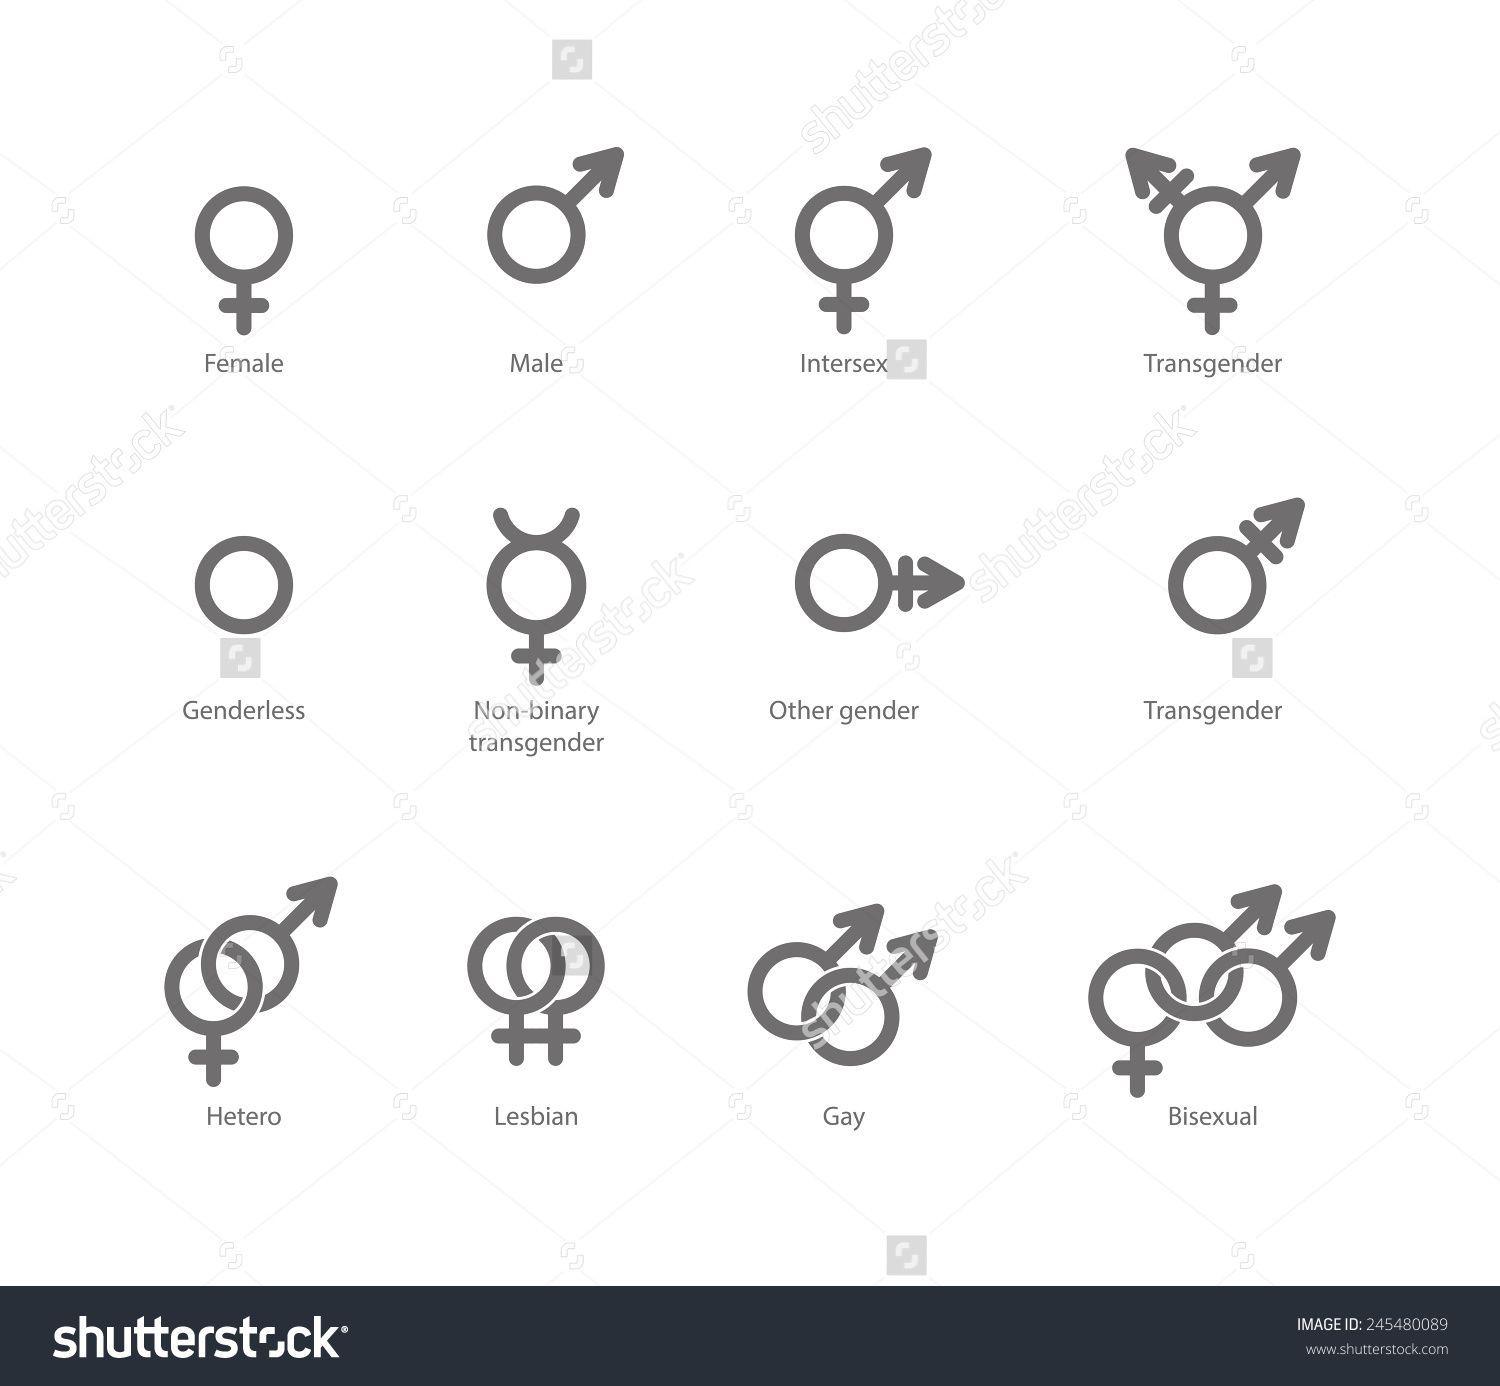 Male Logo - Vector Outlines Icons Of Gender Symbols And Combinations. Male ...